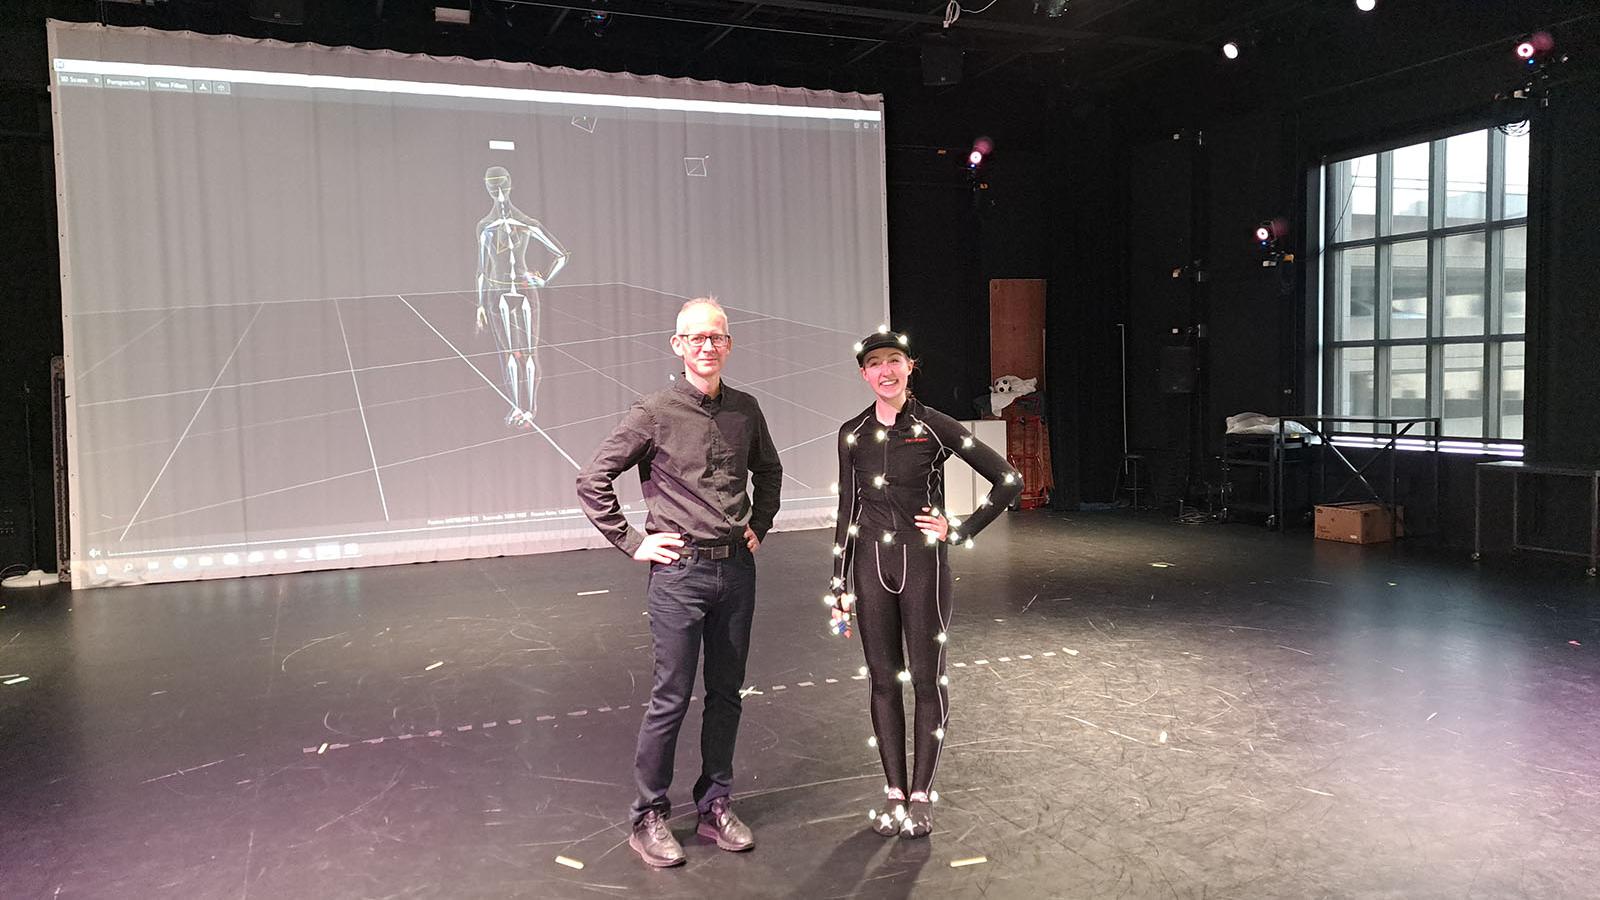 Wobbe and dancer Vivian Corey smile and pose with hands on their hips in from of a motion capture projection